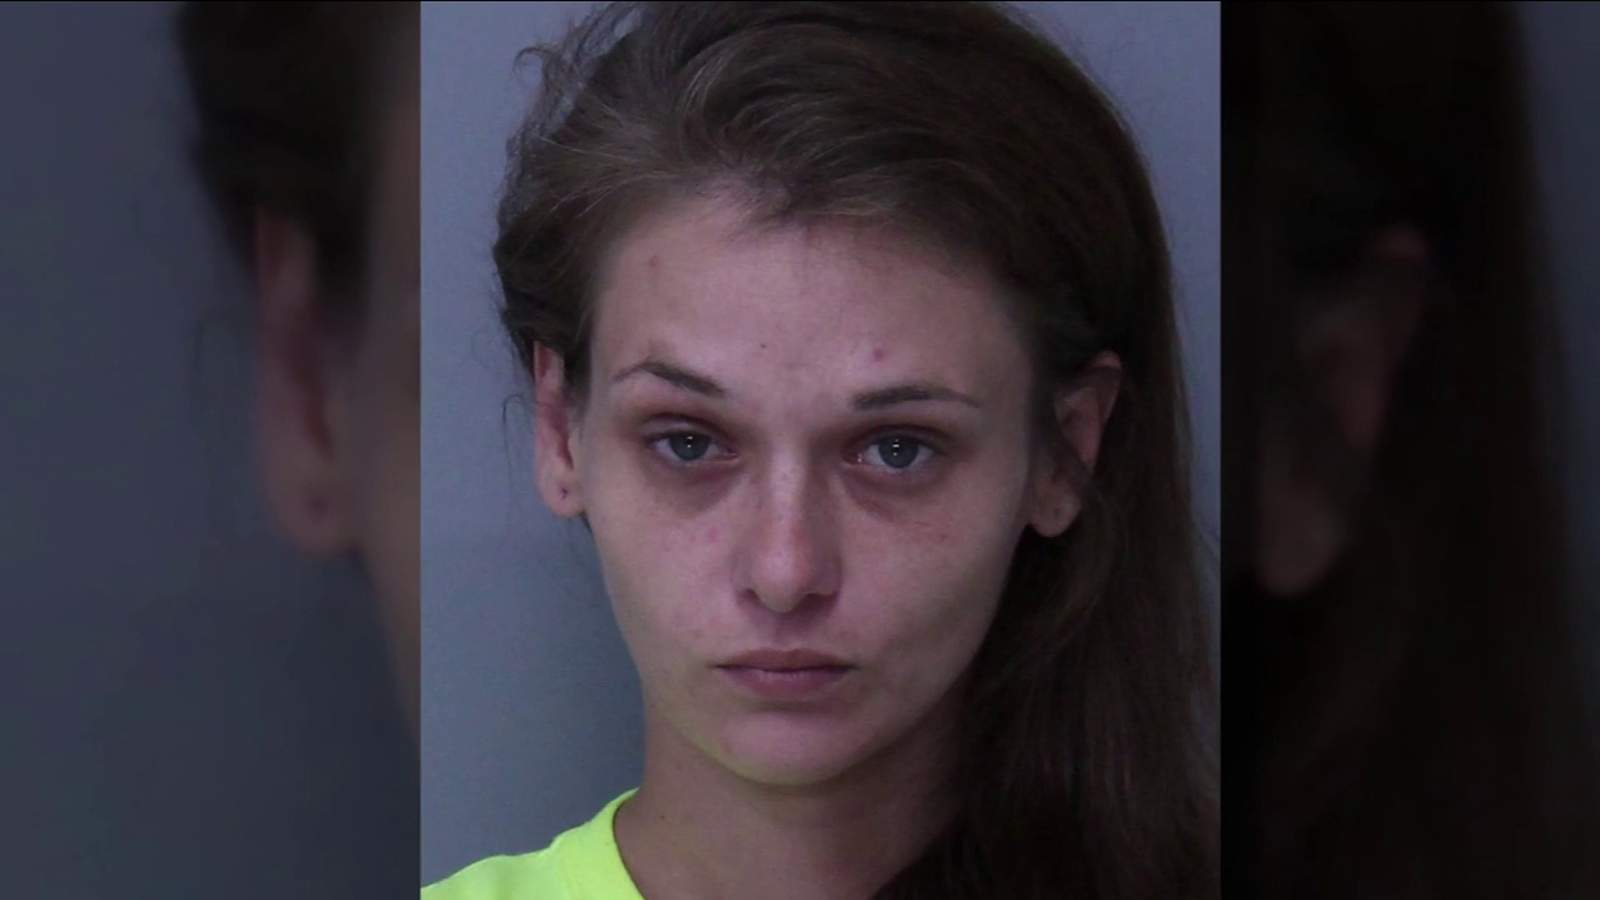 Mother arrested after toddler swallowed pill, lost consciousness